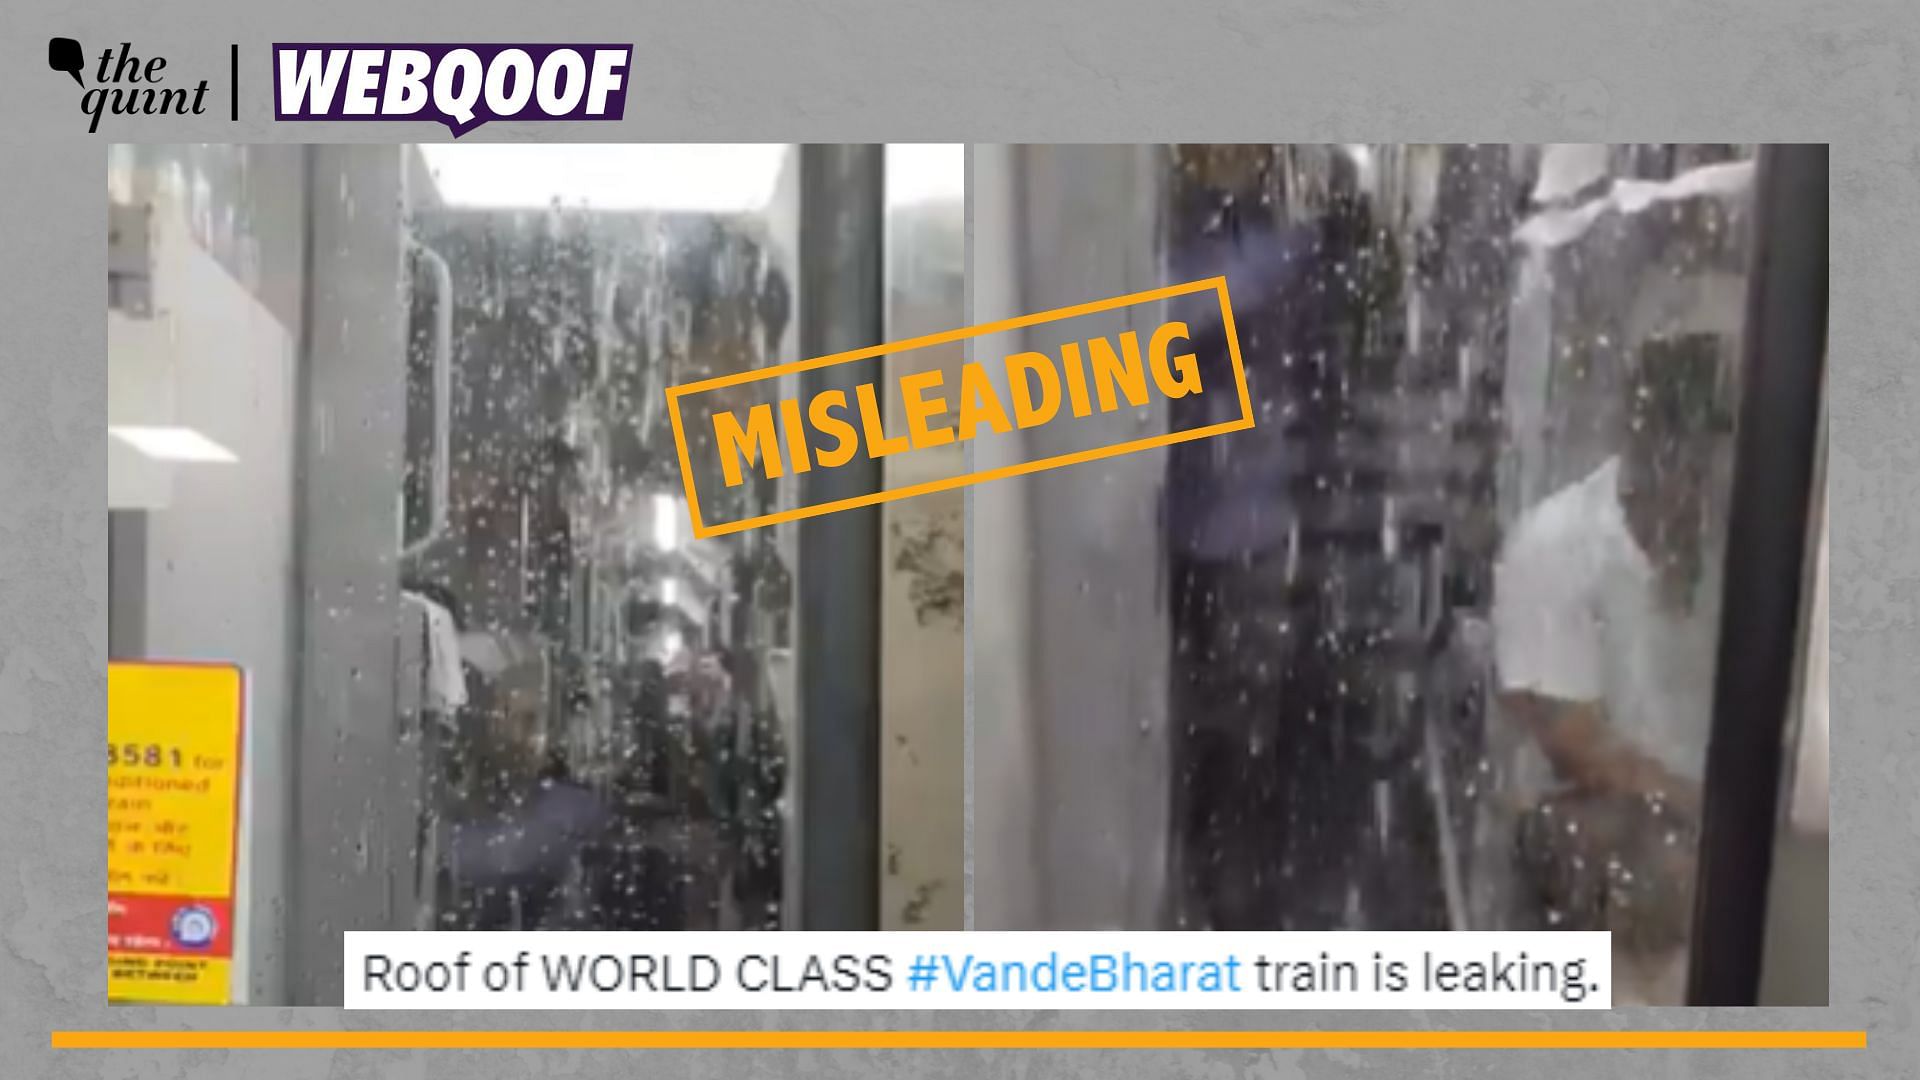 This Video of Water Leaking Inside a Train Is Not From a Vande Bharat Express